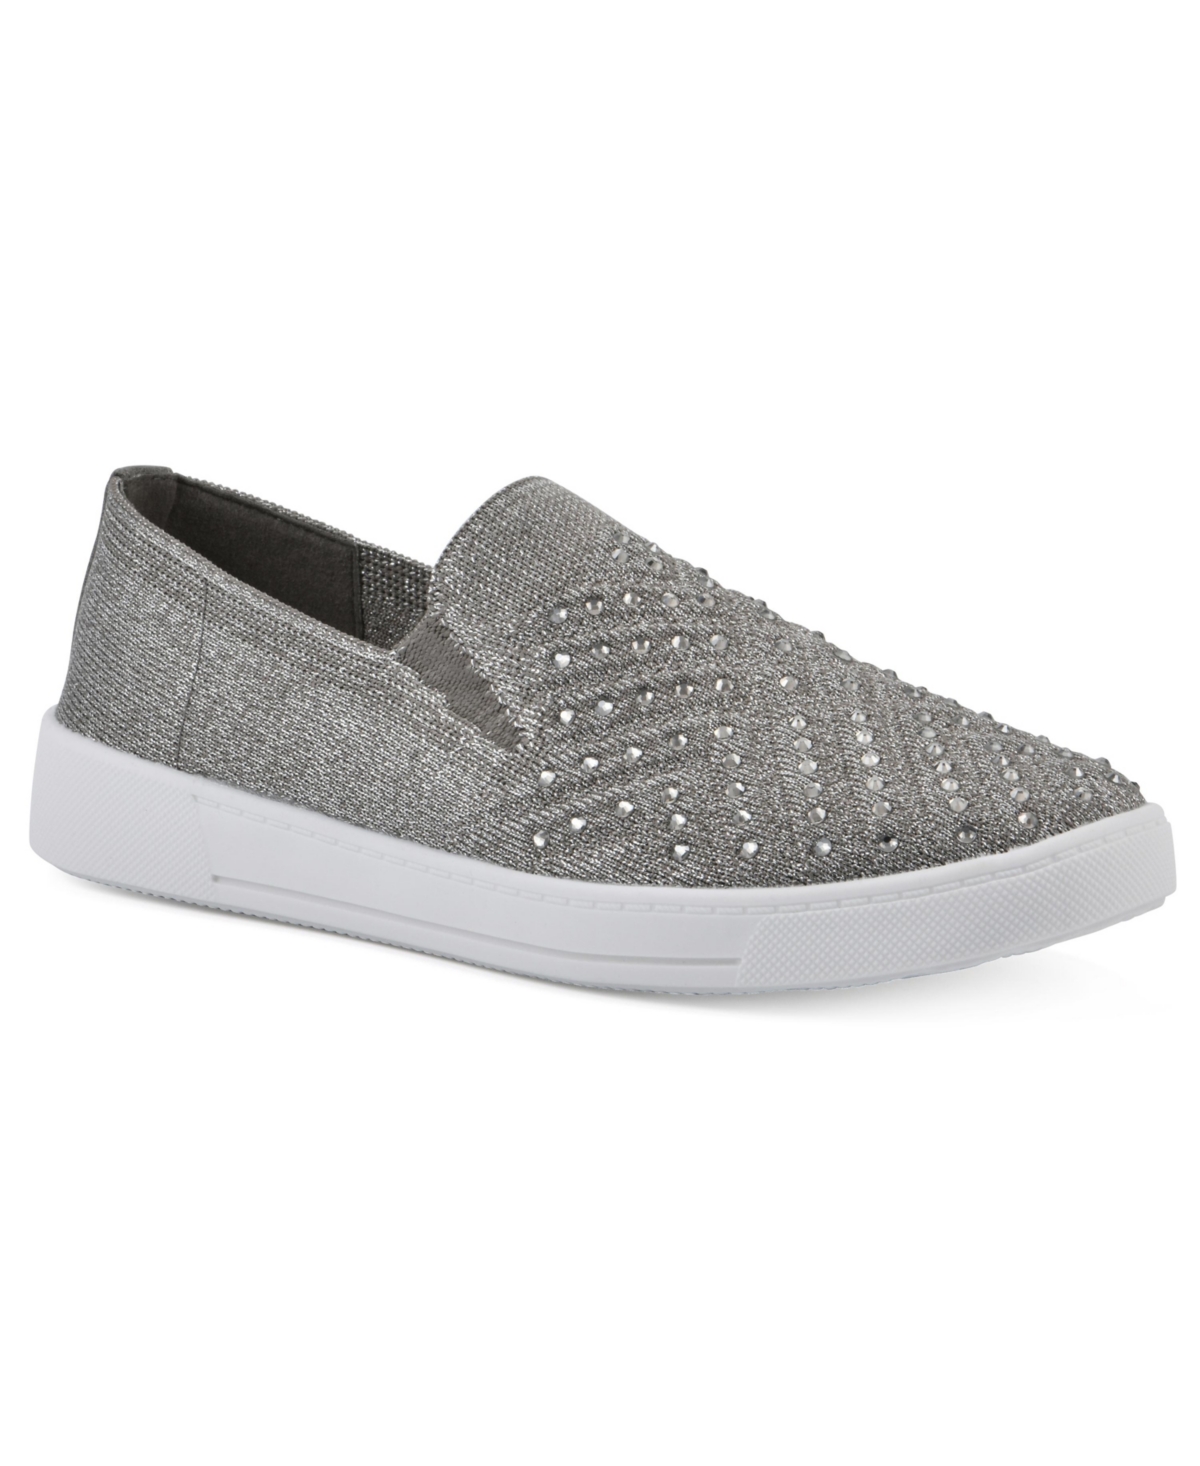 White Mountain Upbring Slip On Sneakers In Silver Fabric